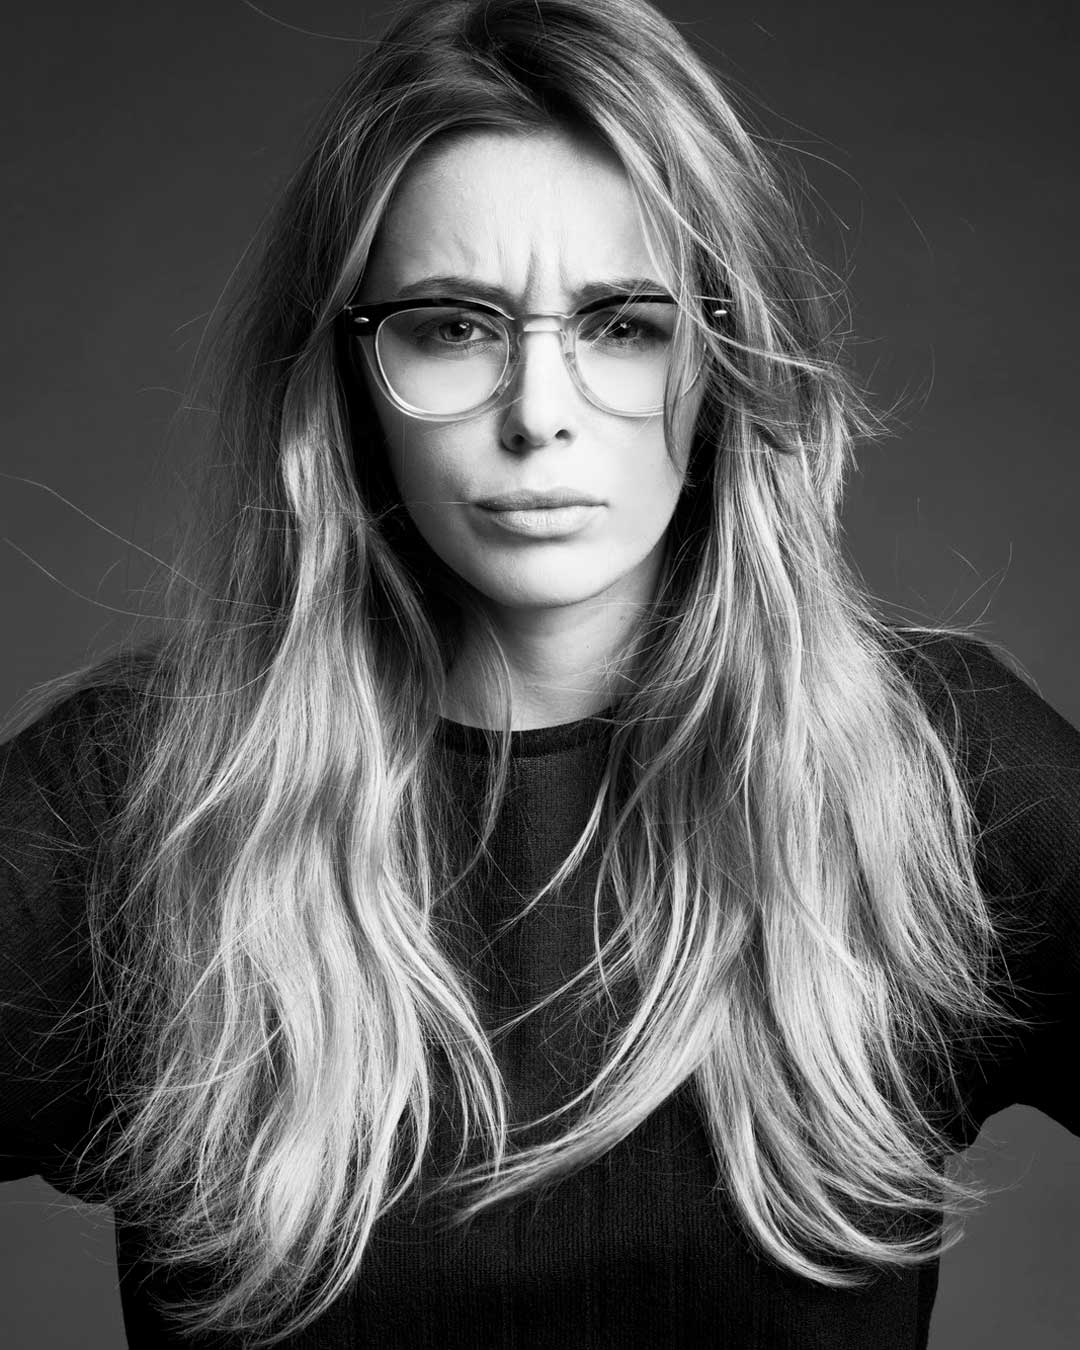 Greyscale image of woman with long light hair looking confused wearing gradient acetate glasses frame